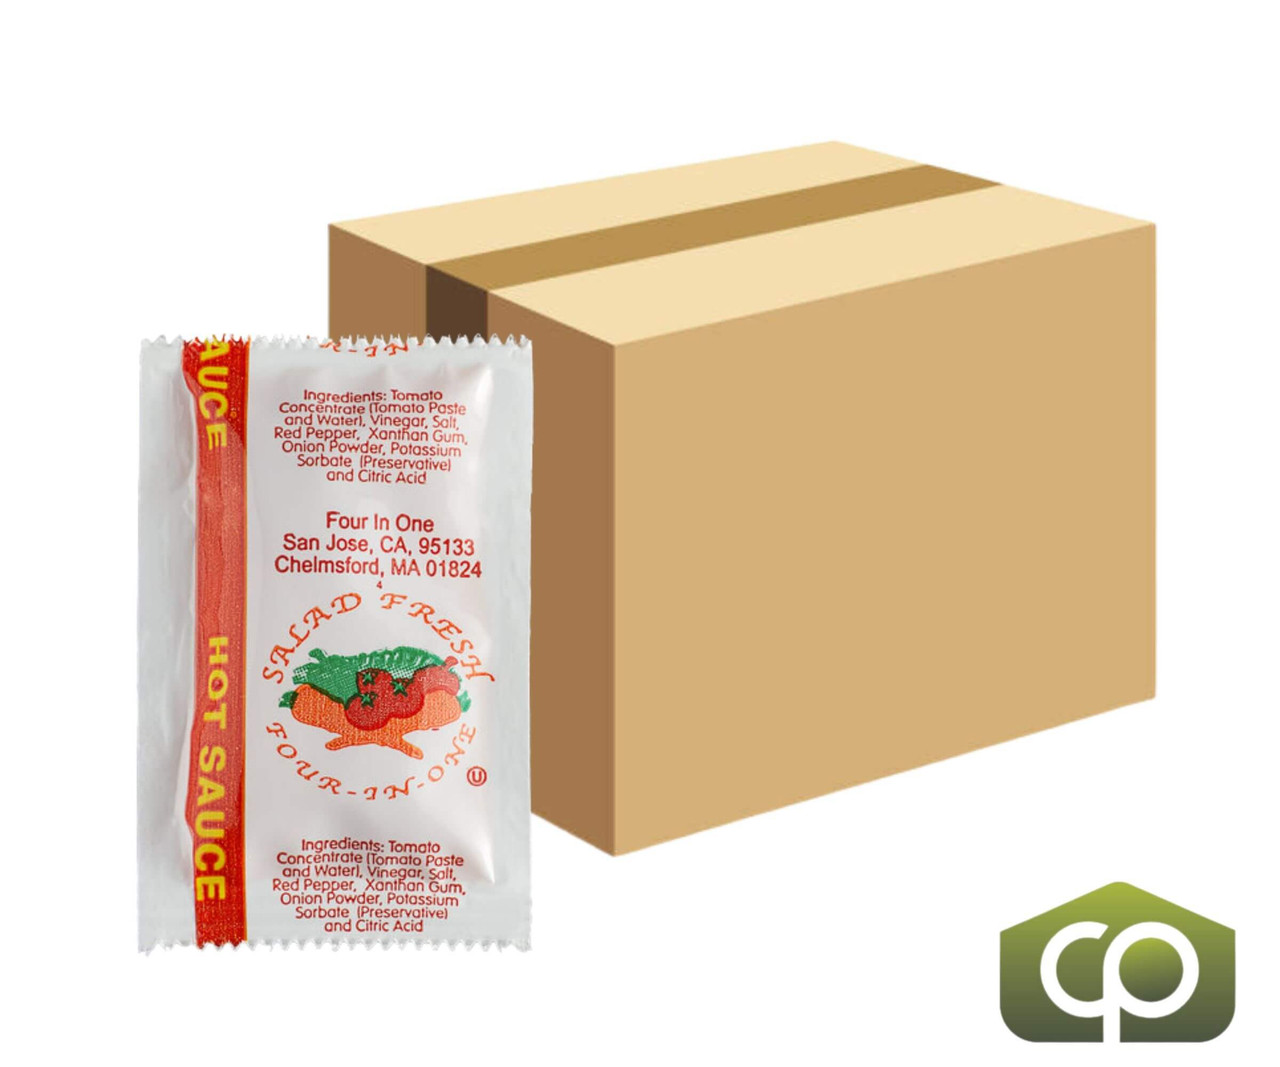 Hot Sauce Portion Packets - 3g, 200/Case - On-the-Go Boldness - Chicken Pieces